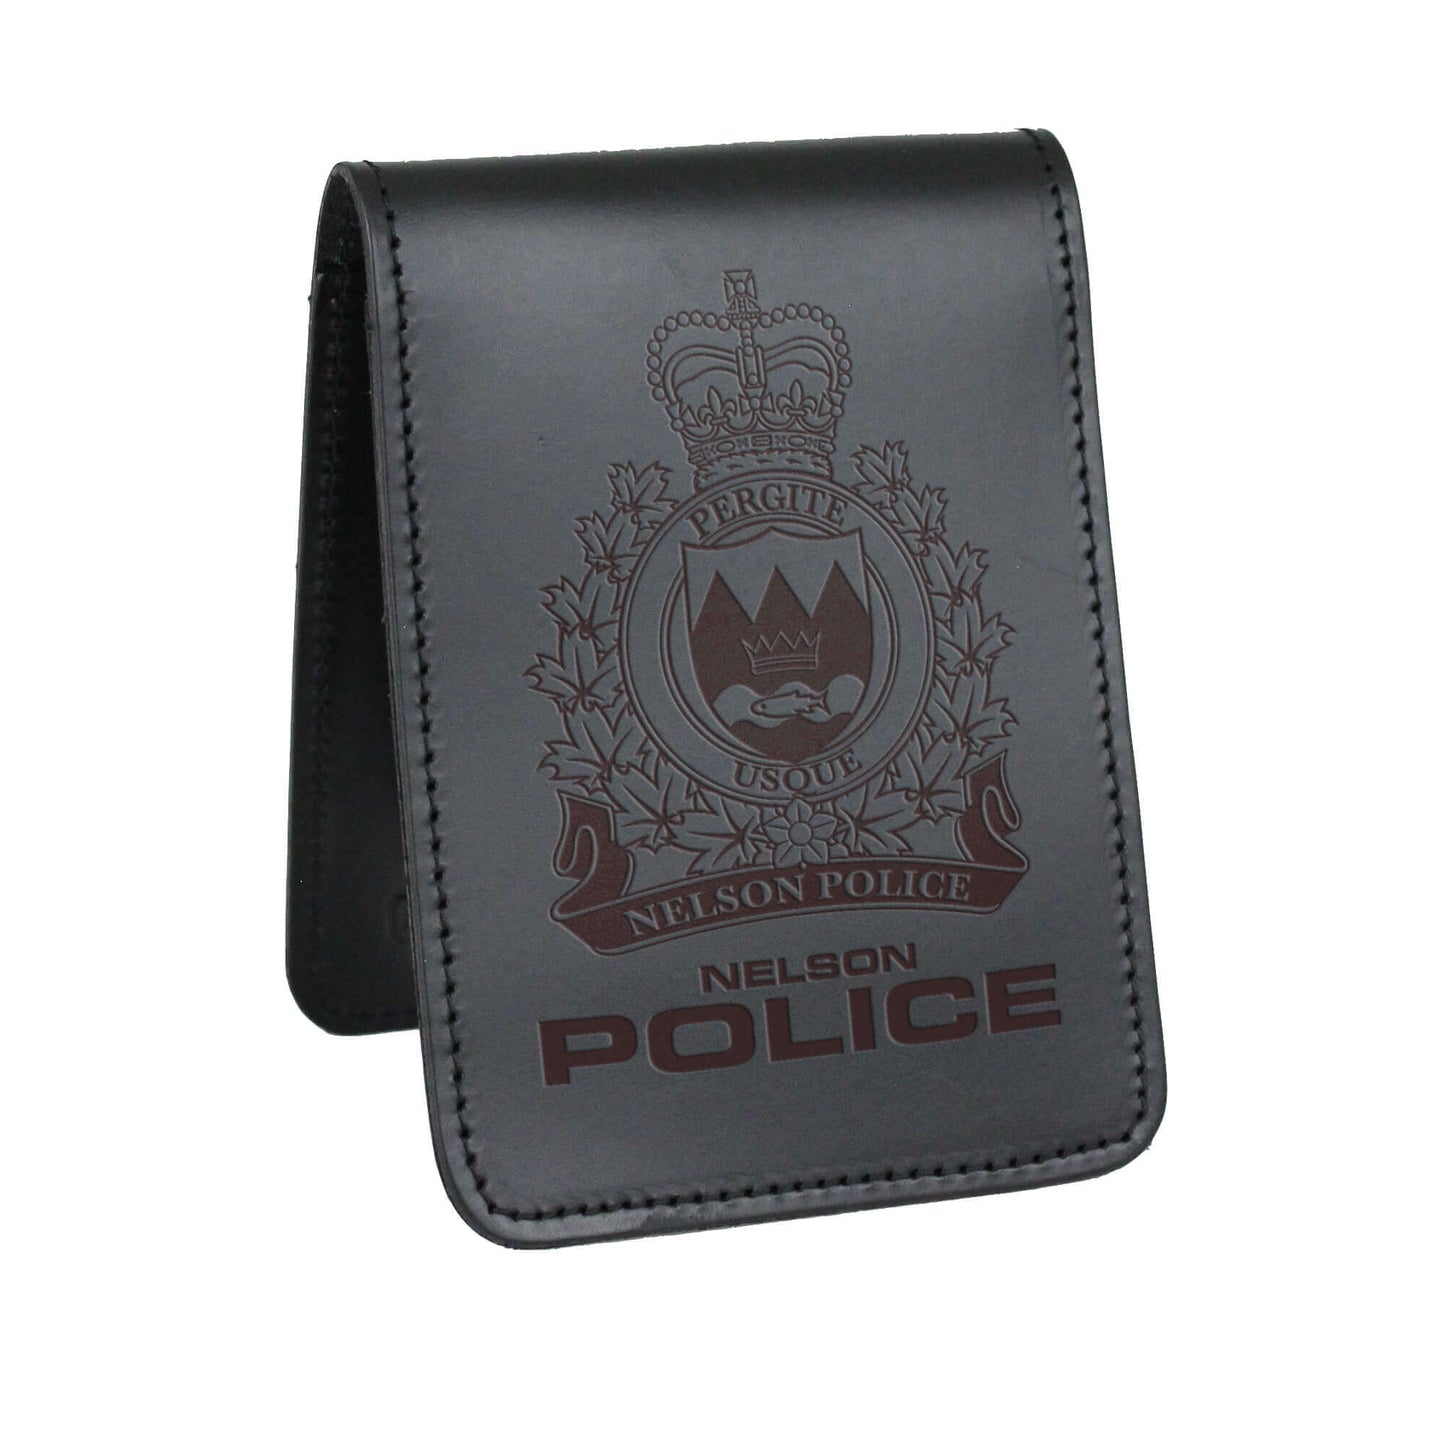 Nelson Police Department Notebook Cover